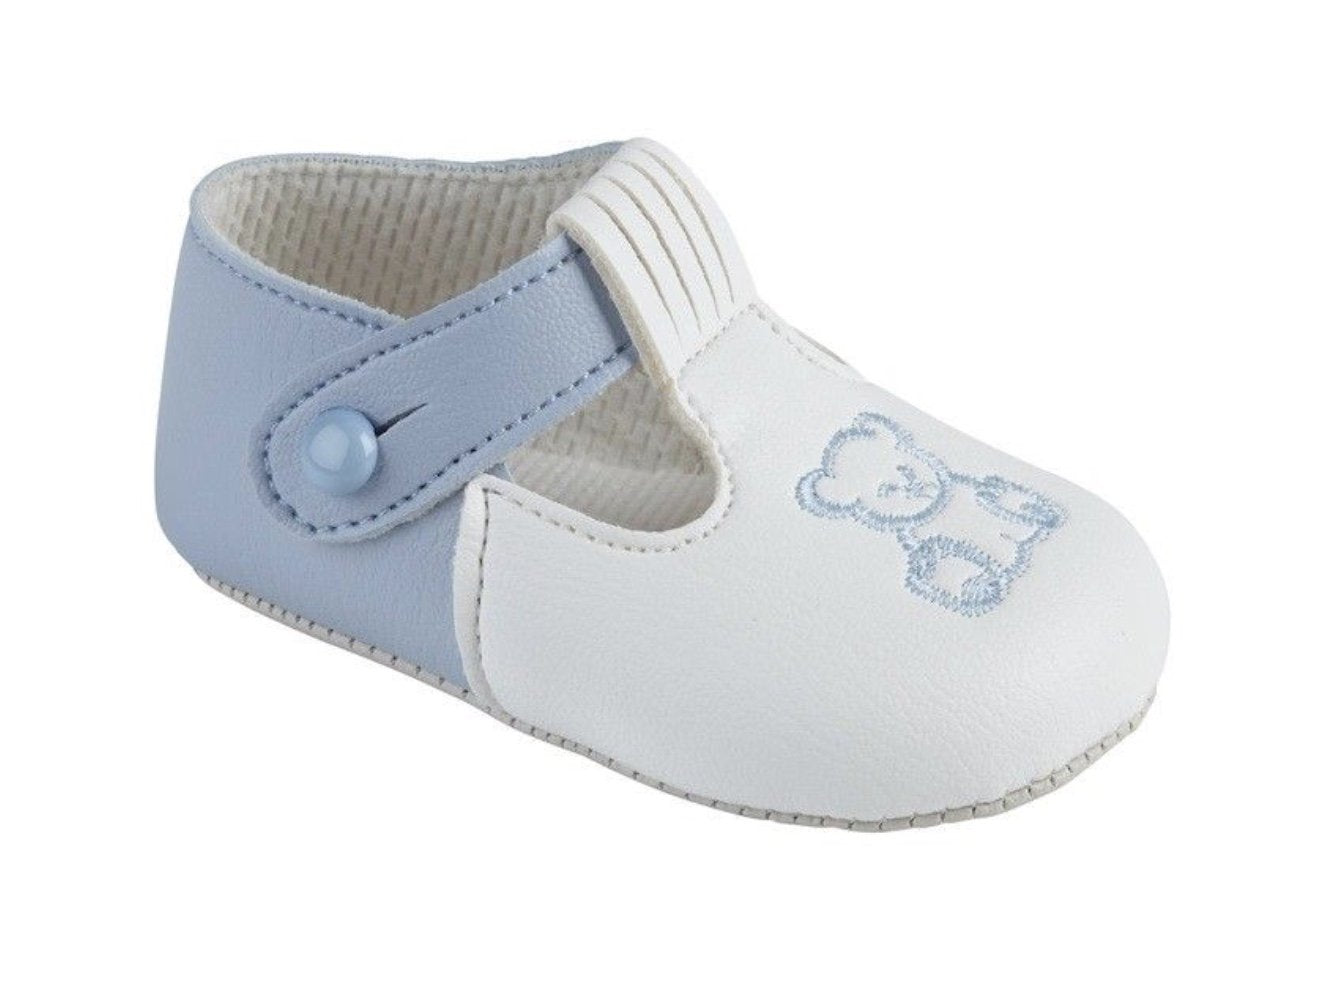 baby pods shoes